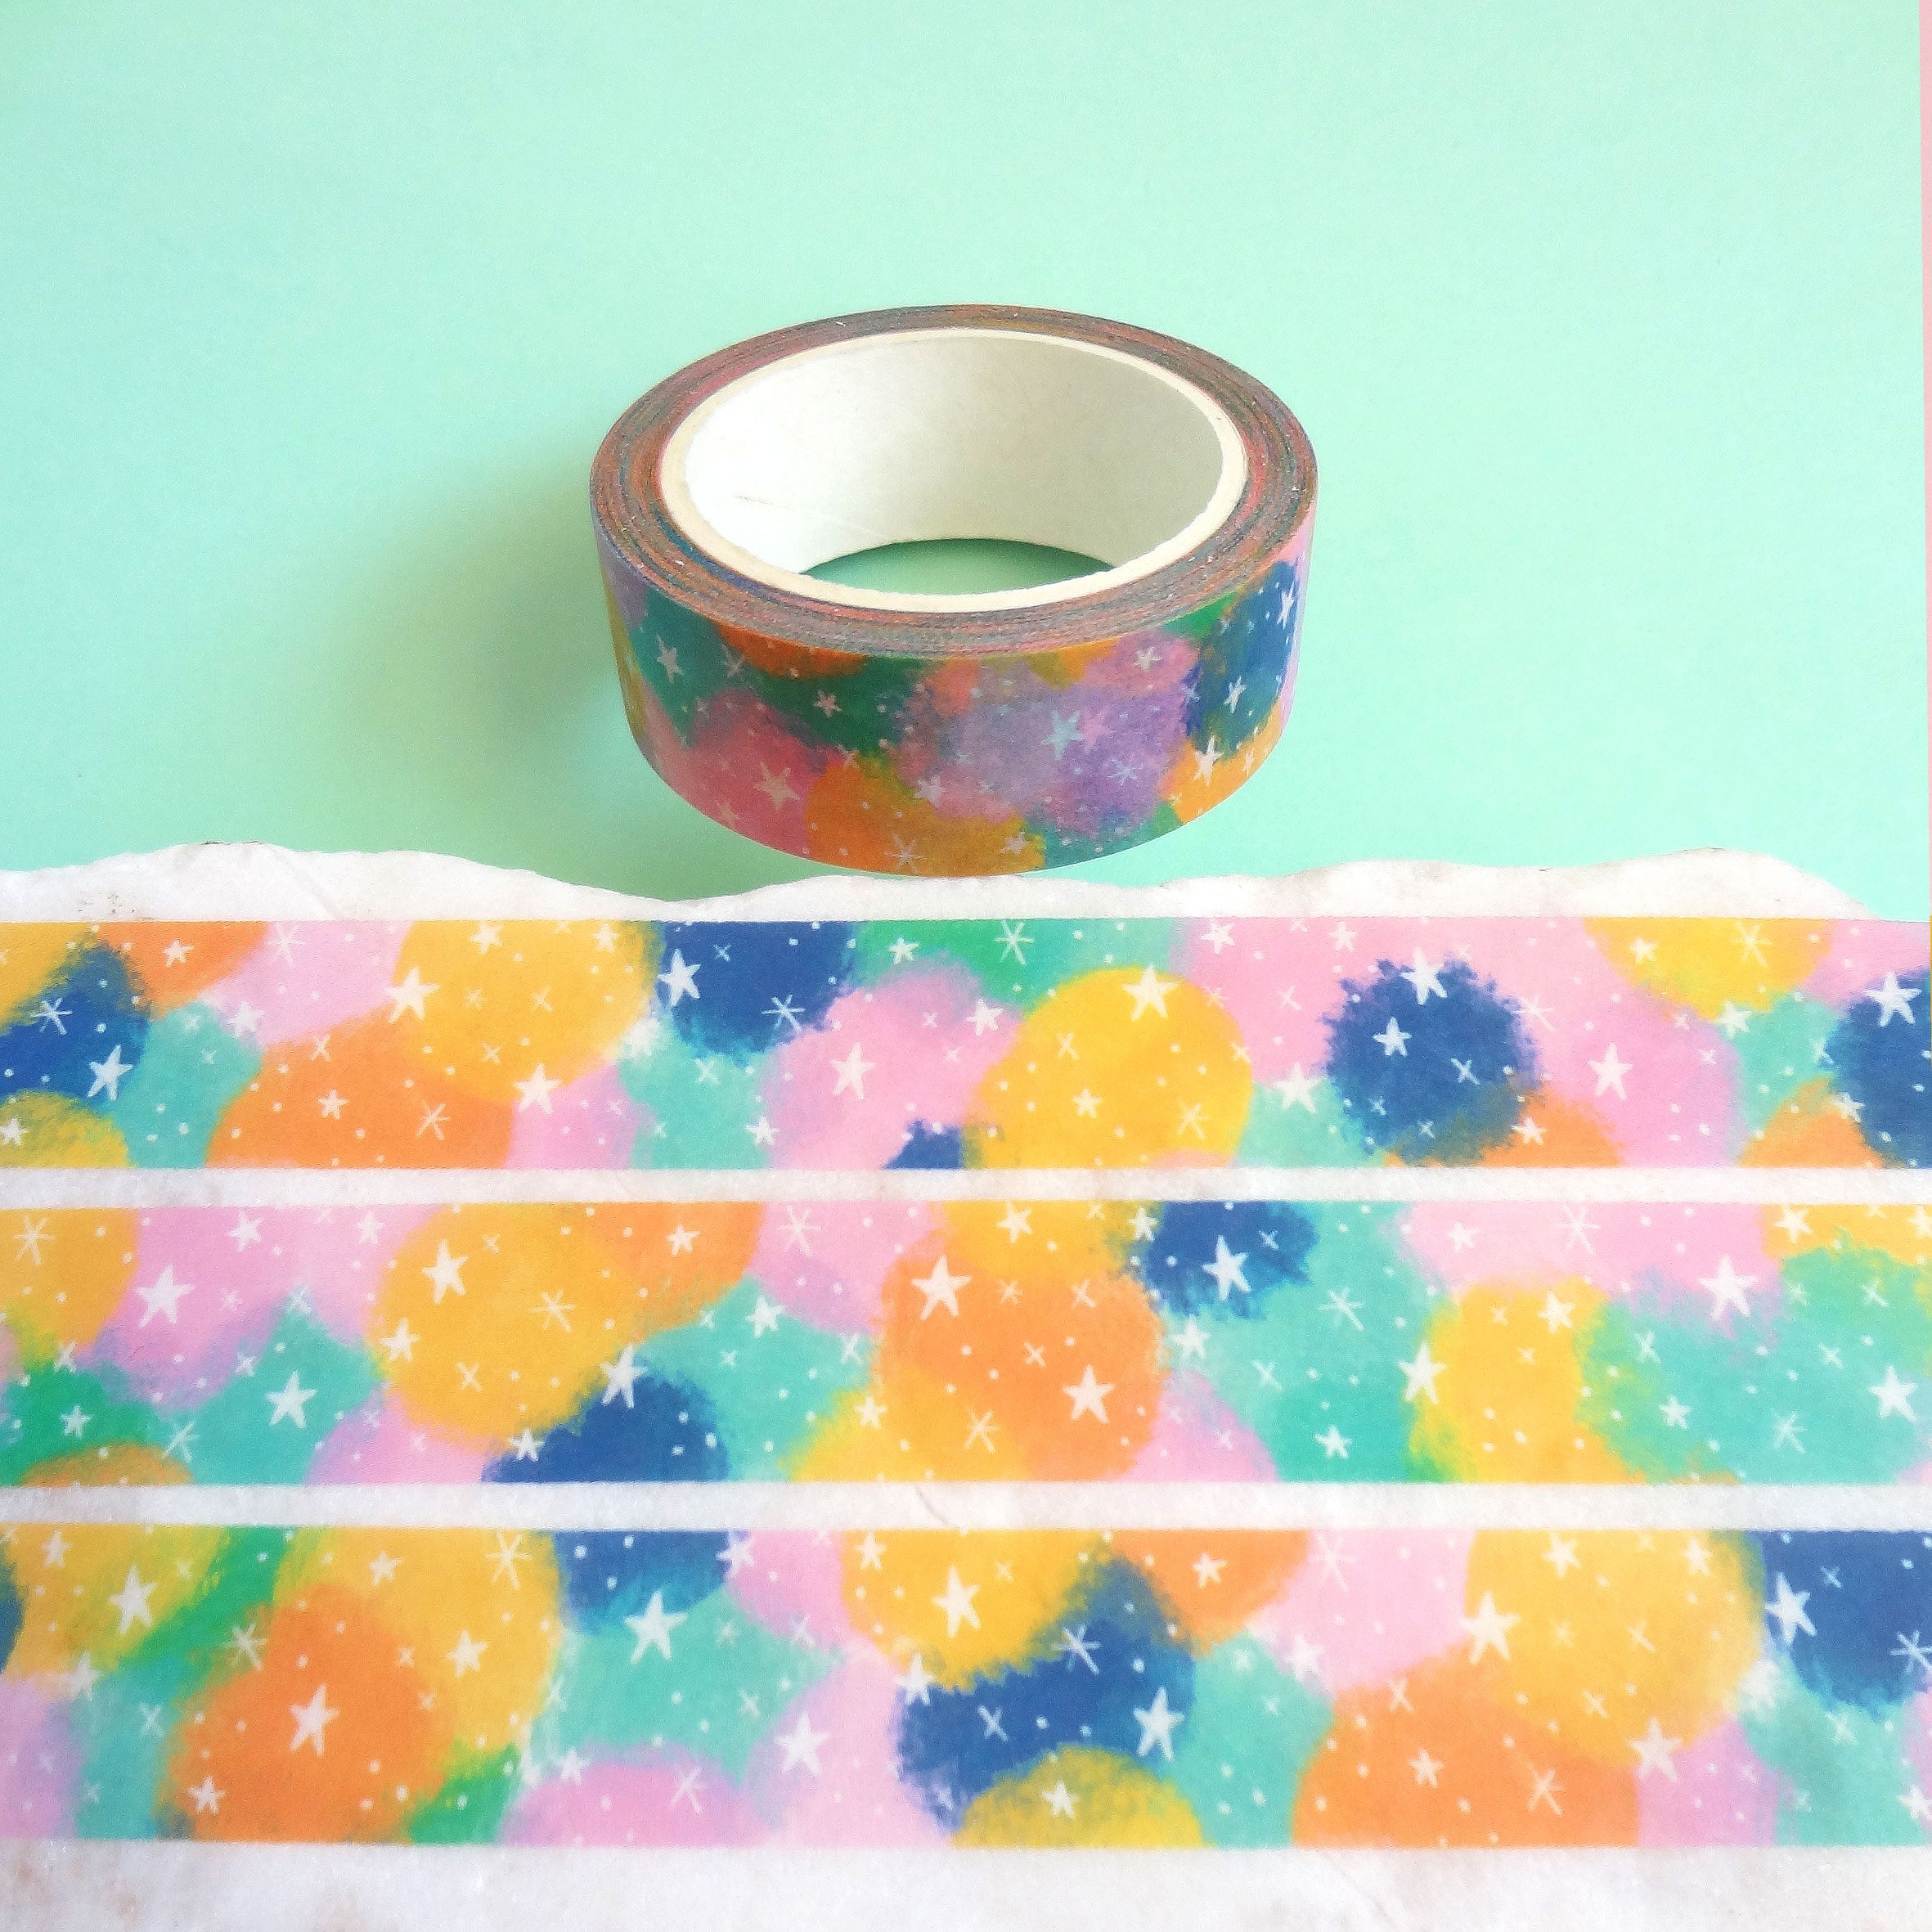 Colourful Rainbow Washi Tape, Rainbow Stripe Washi Tape, Multicoloured Decorative  Tape, Recyclable Paper Tape, Bright Planner Stationery 